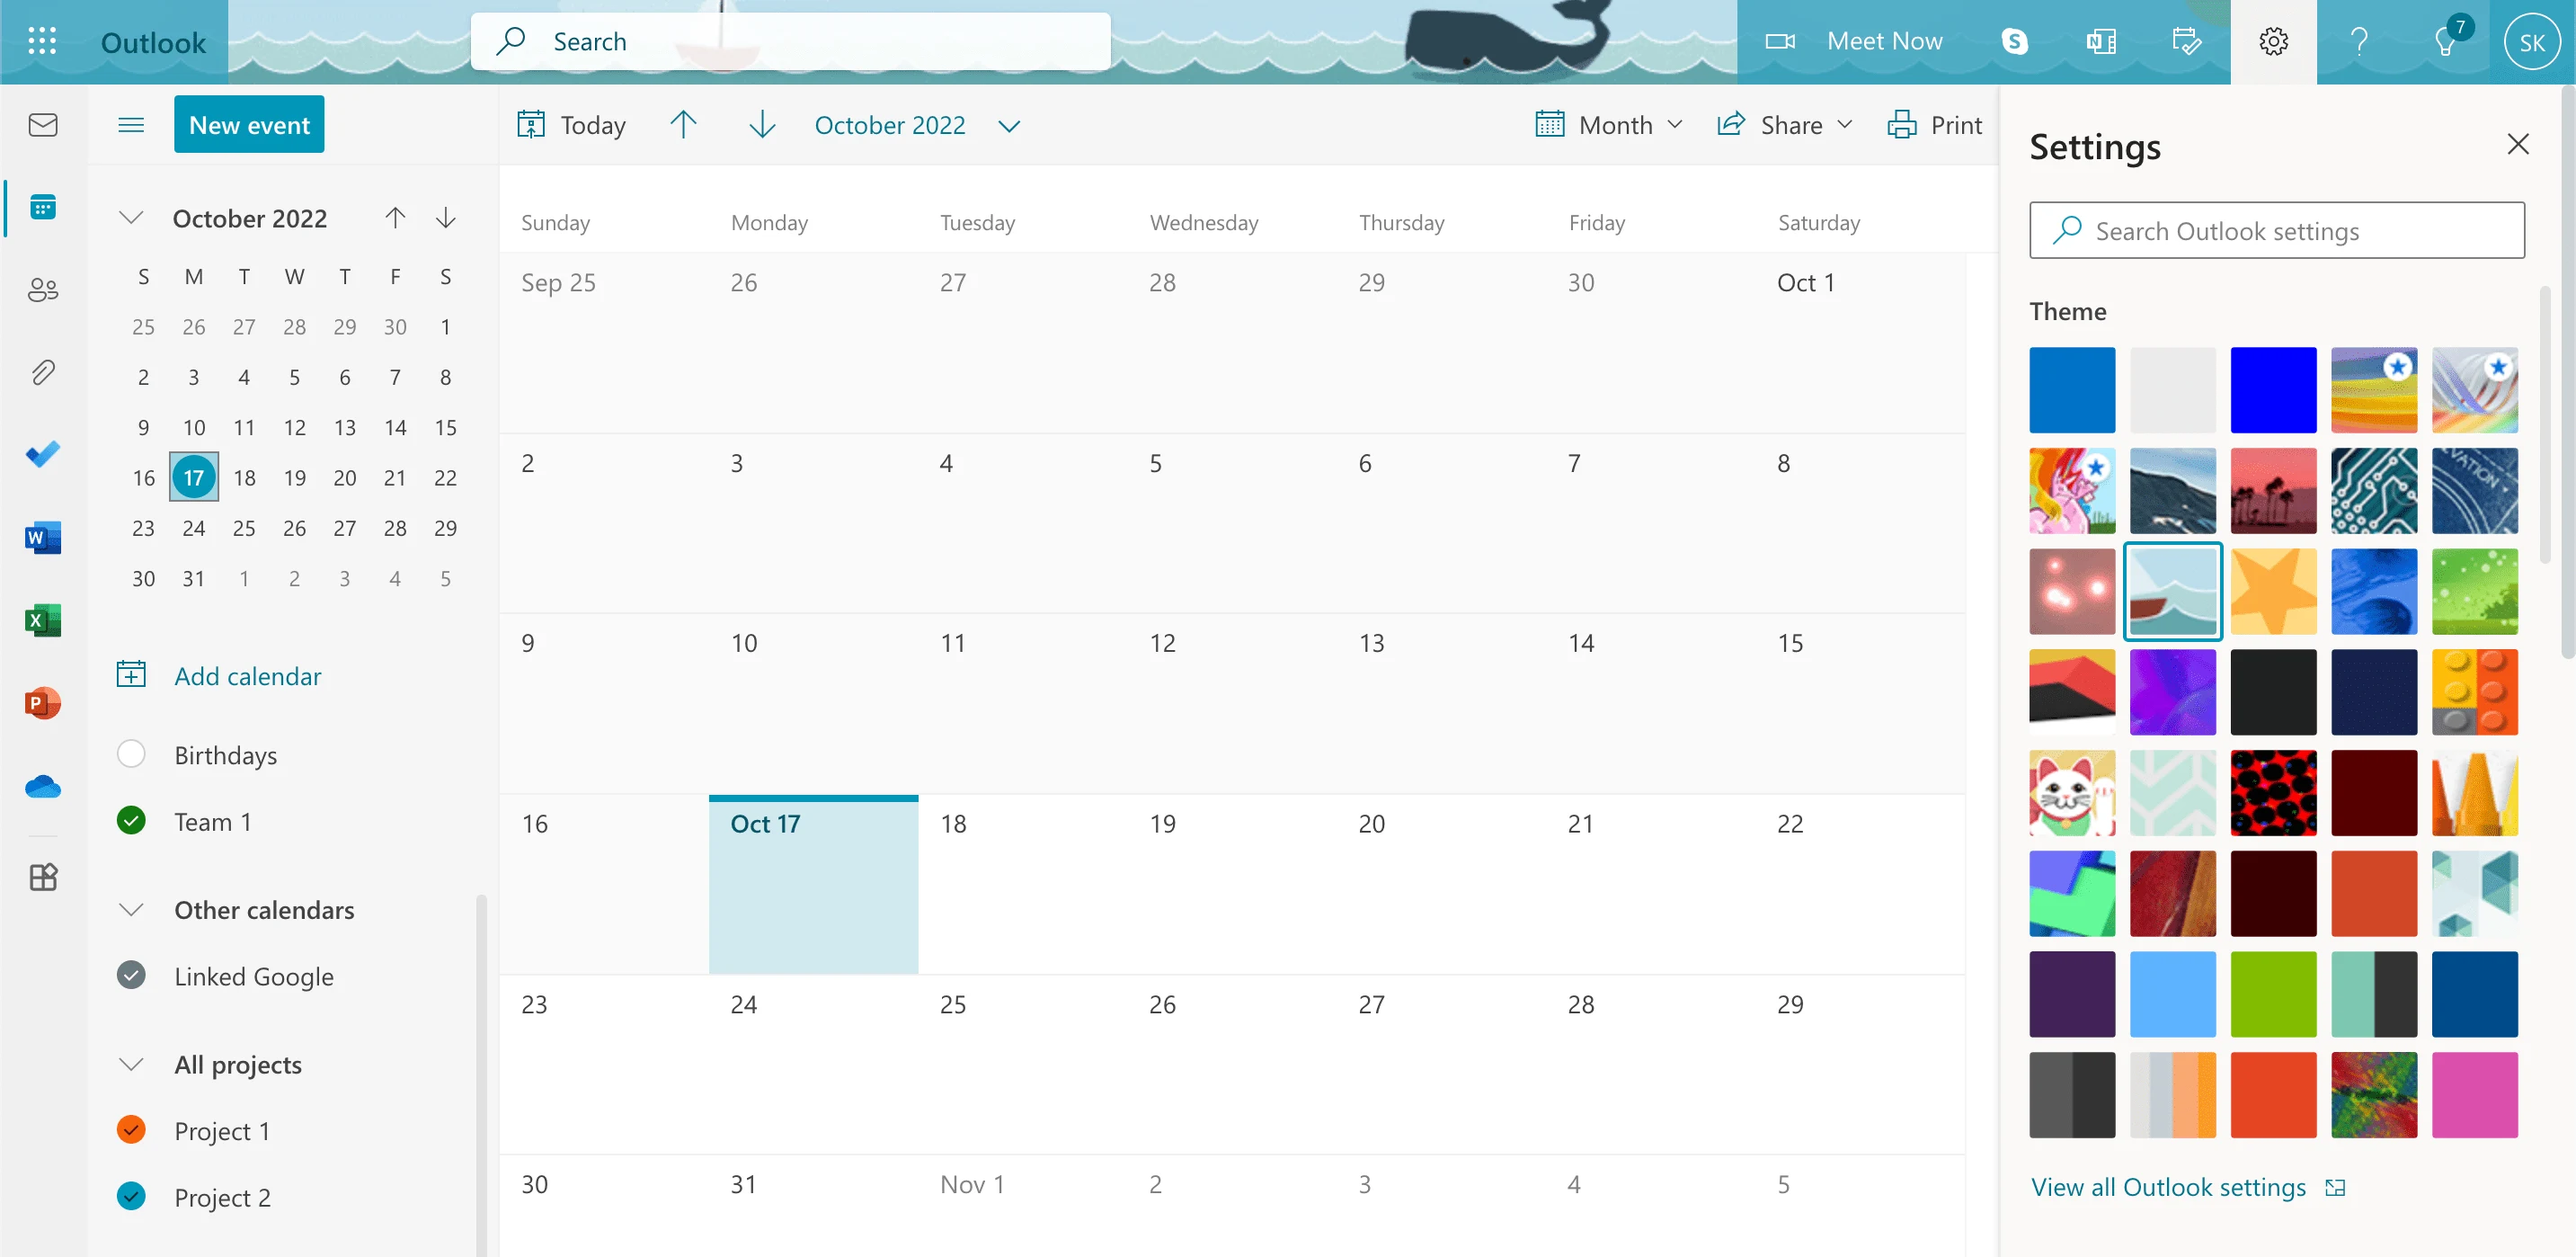 Once you have the basics of your Office 365 Calendar set up, you can customize the app using themes.